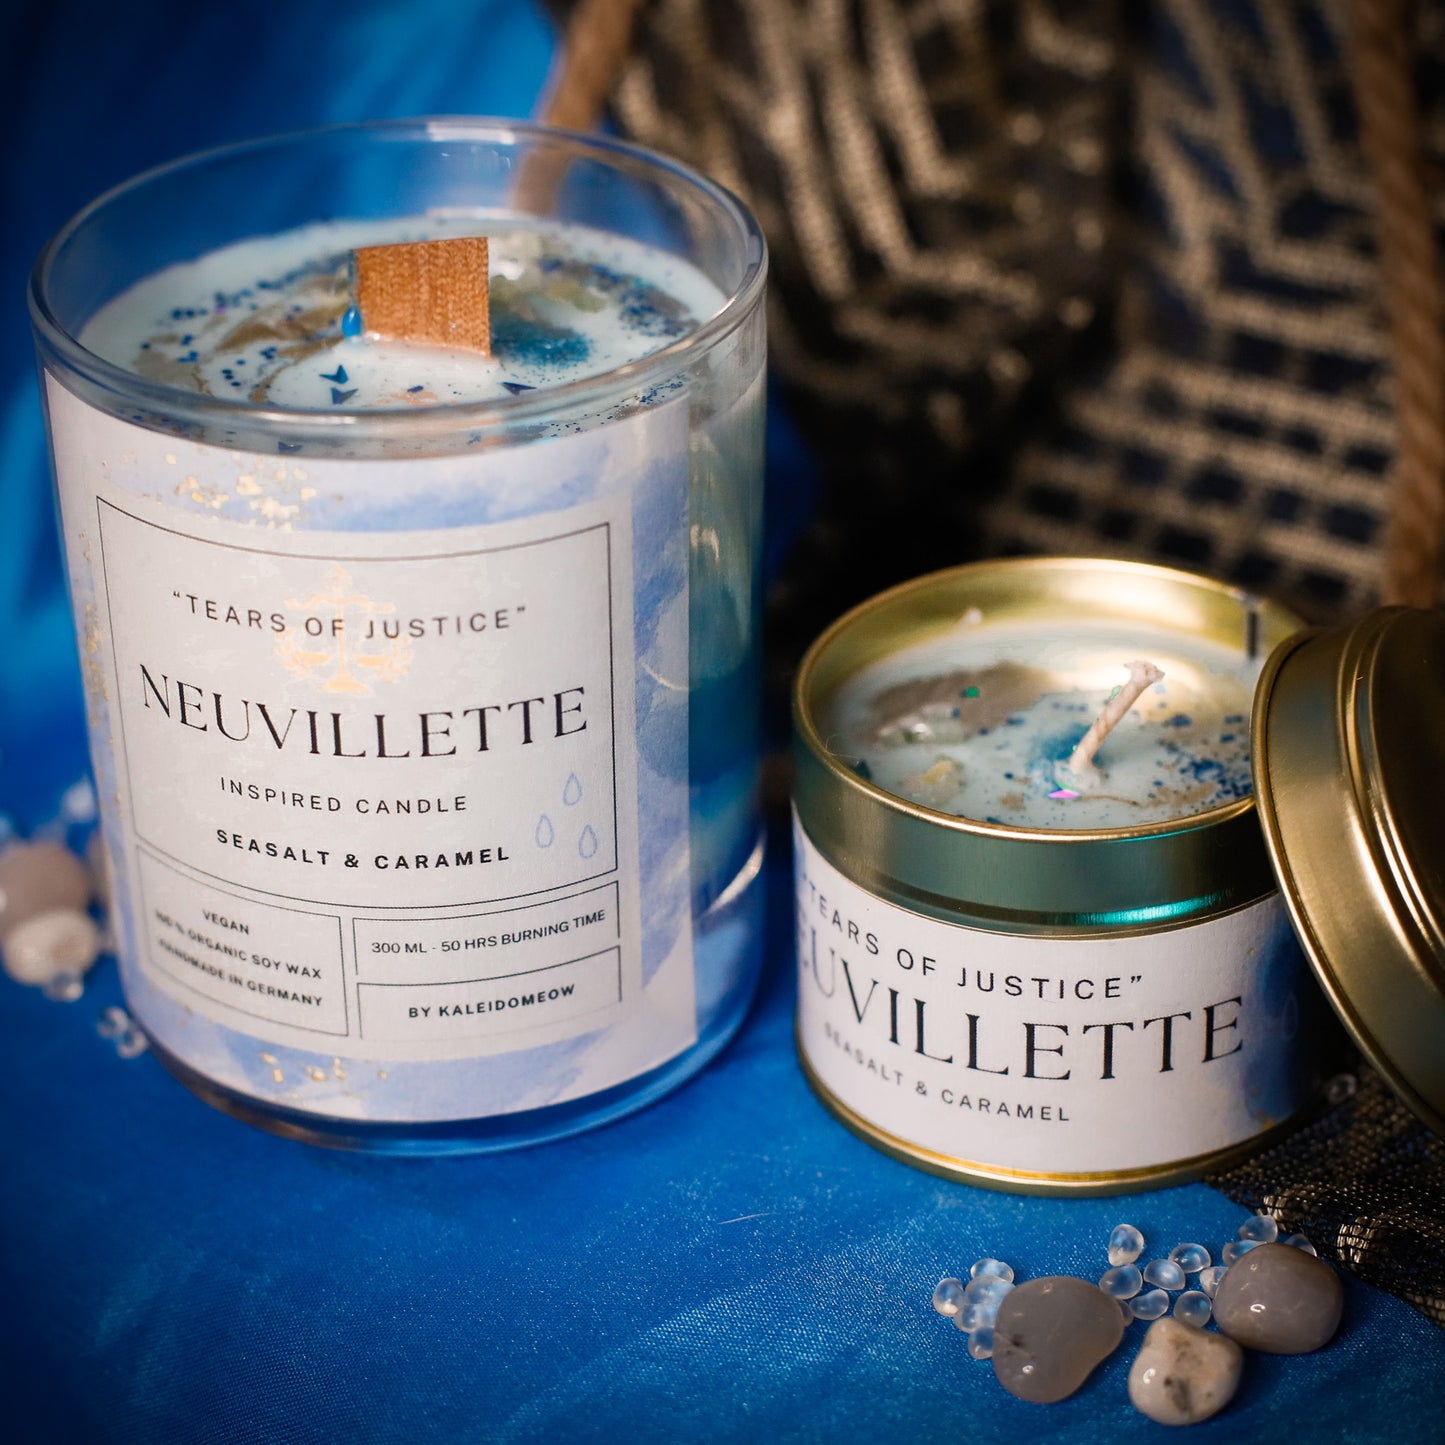 Neuvillette inspired candle - 'Tears of Justice' Genshin inspired scented candle 300 ML